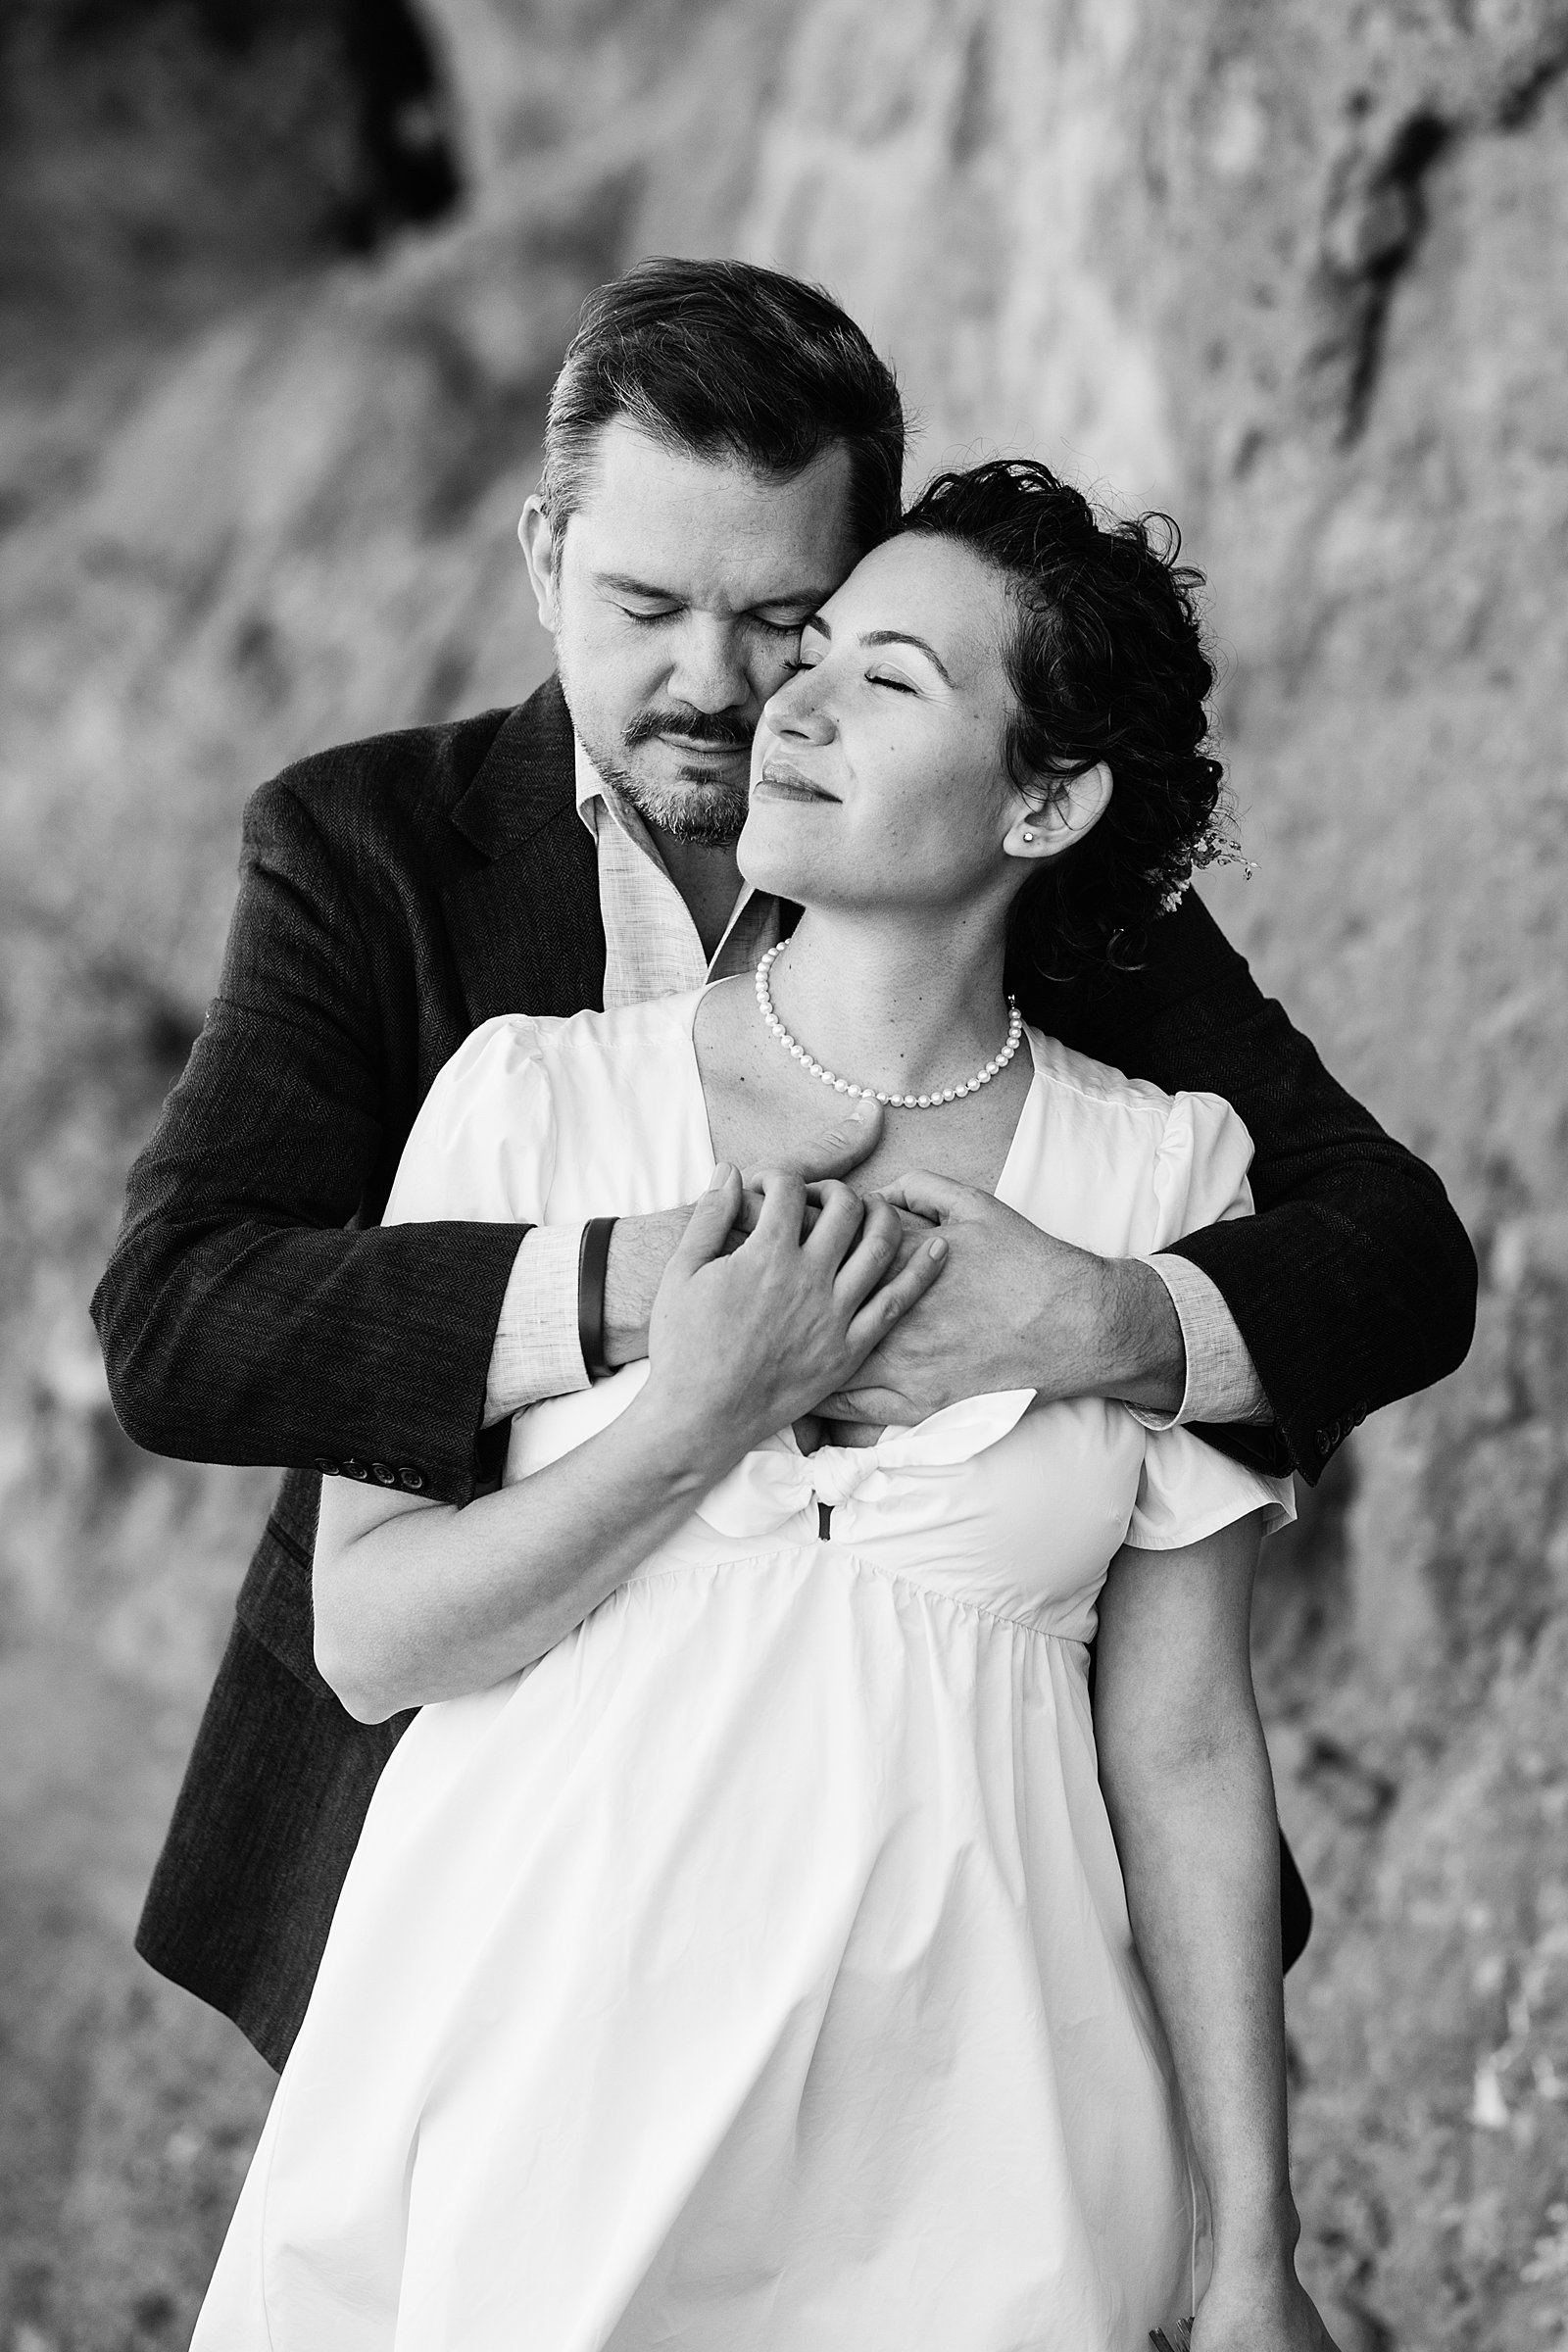 Bride and Groom share an intimate moment at their Papago Park elopement by Arizona elopement photographer PMA Photography.